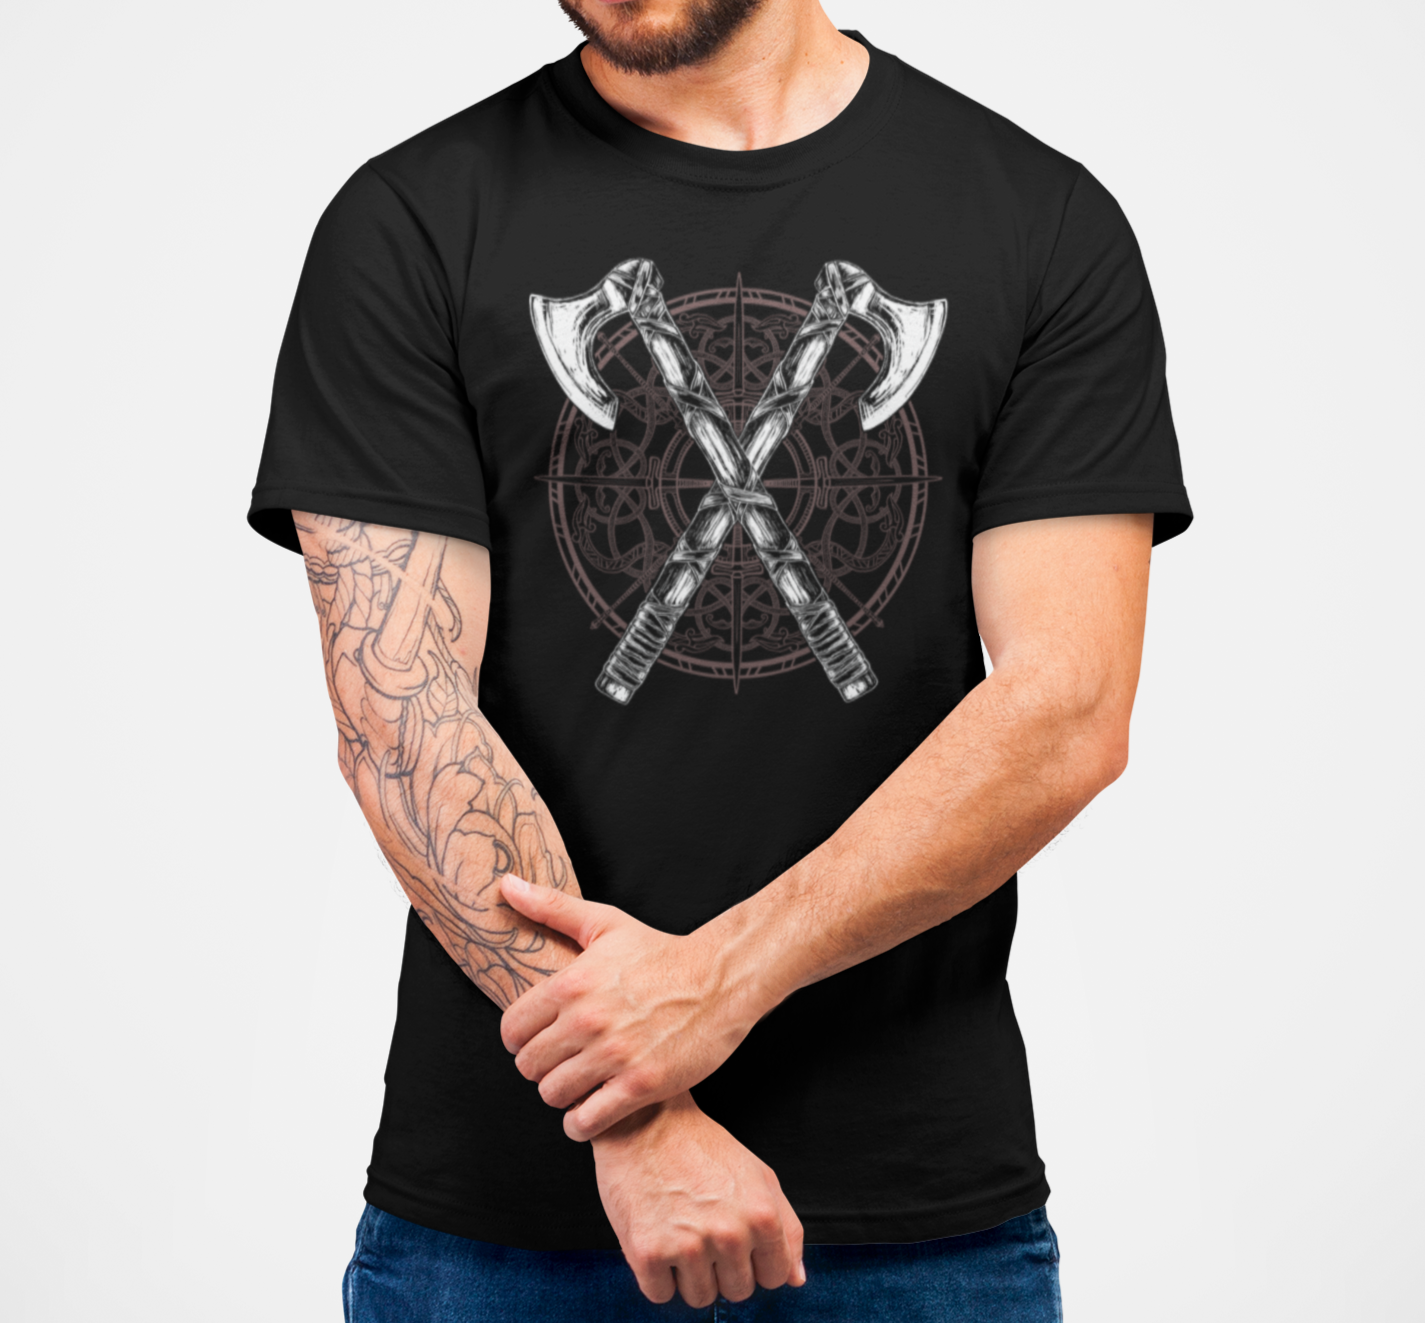 Call to Arms / T-Shirt